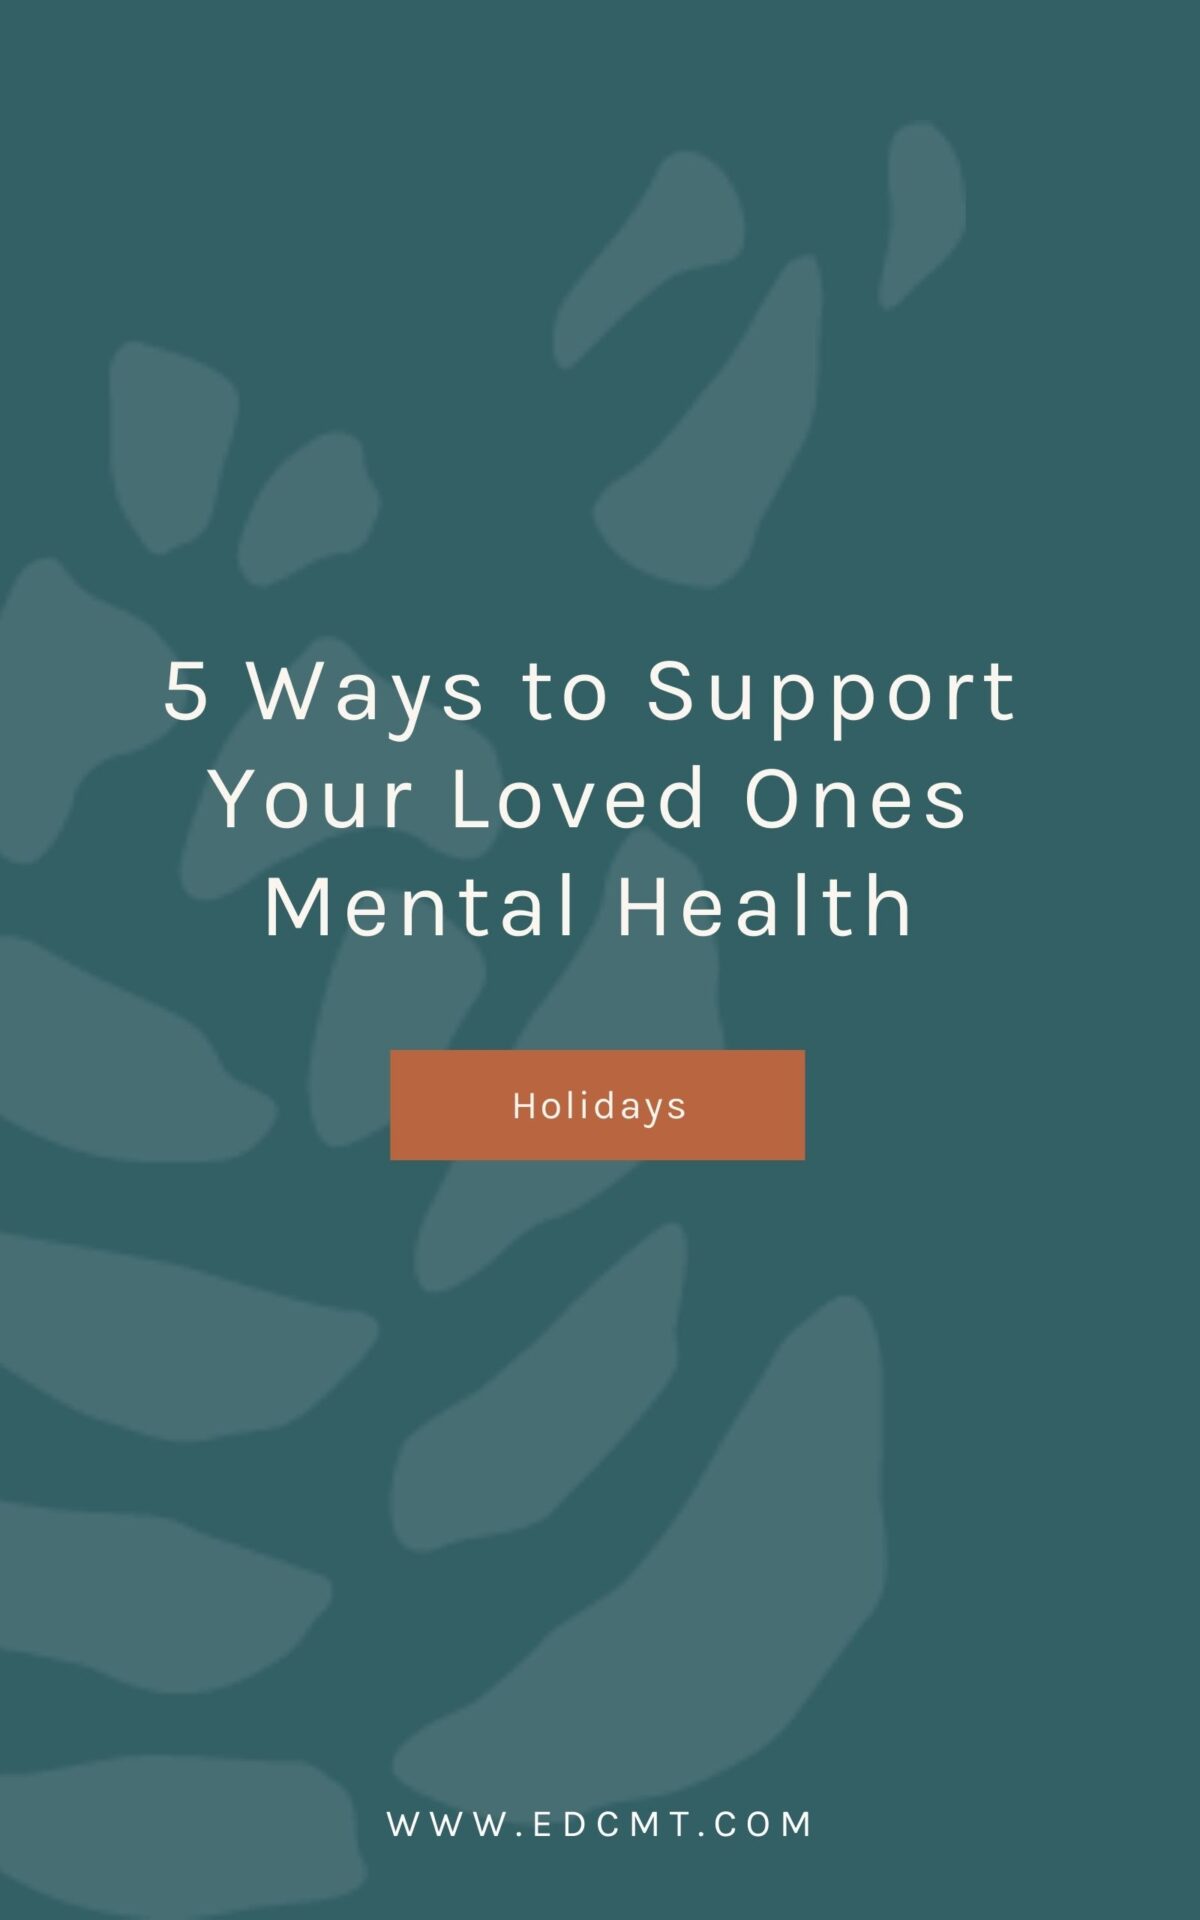 5 ways to support your loved ones mental health. Title page.